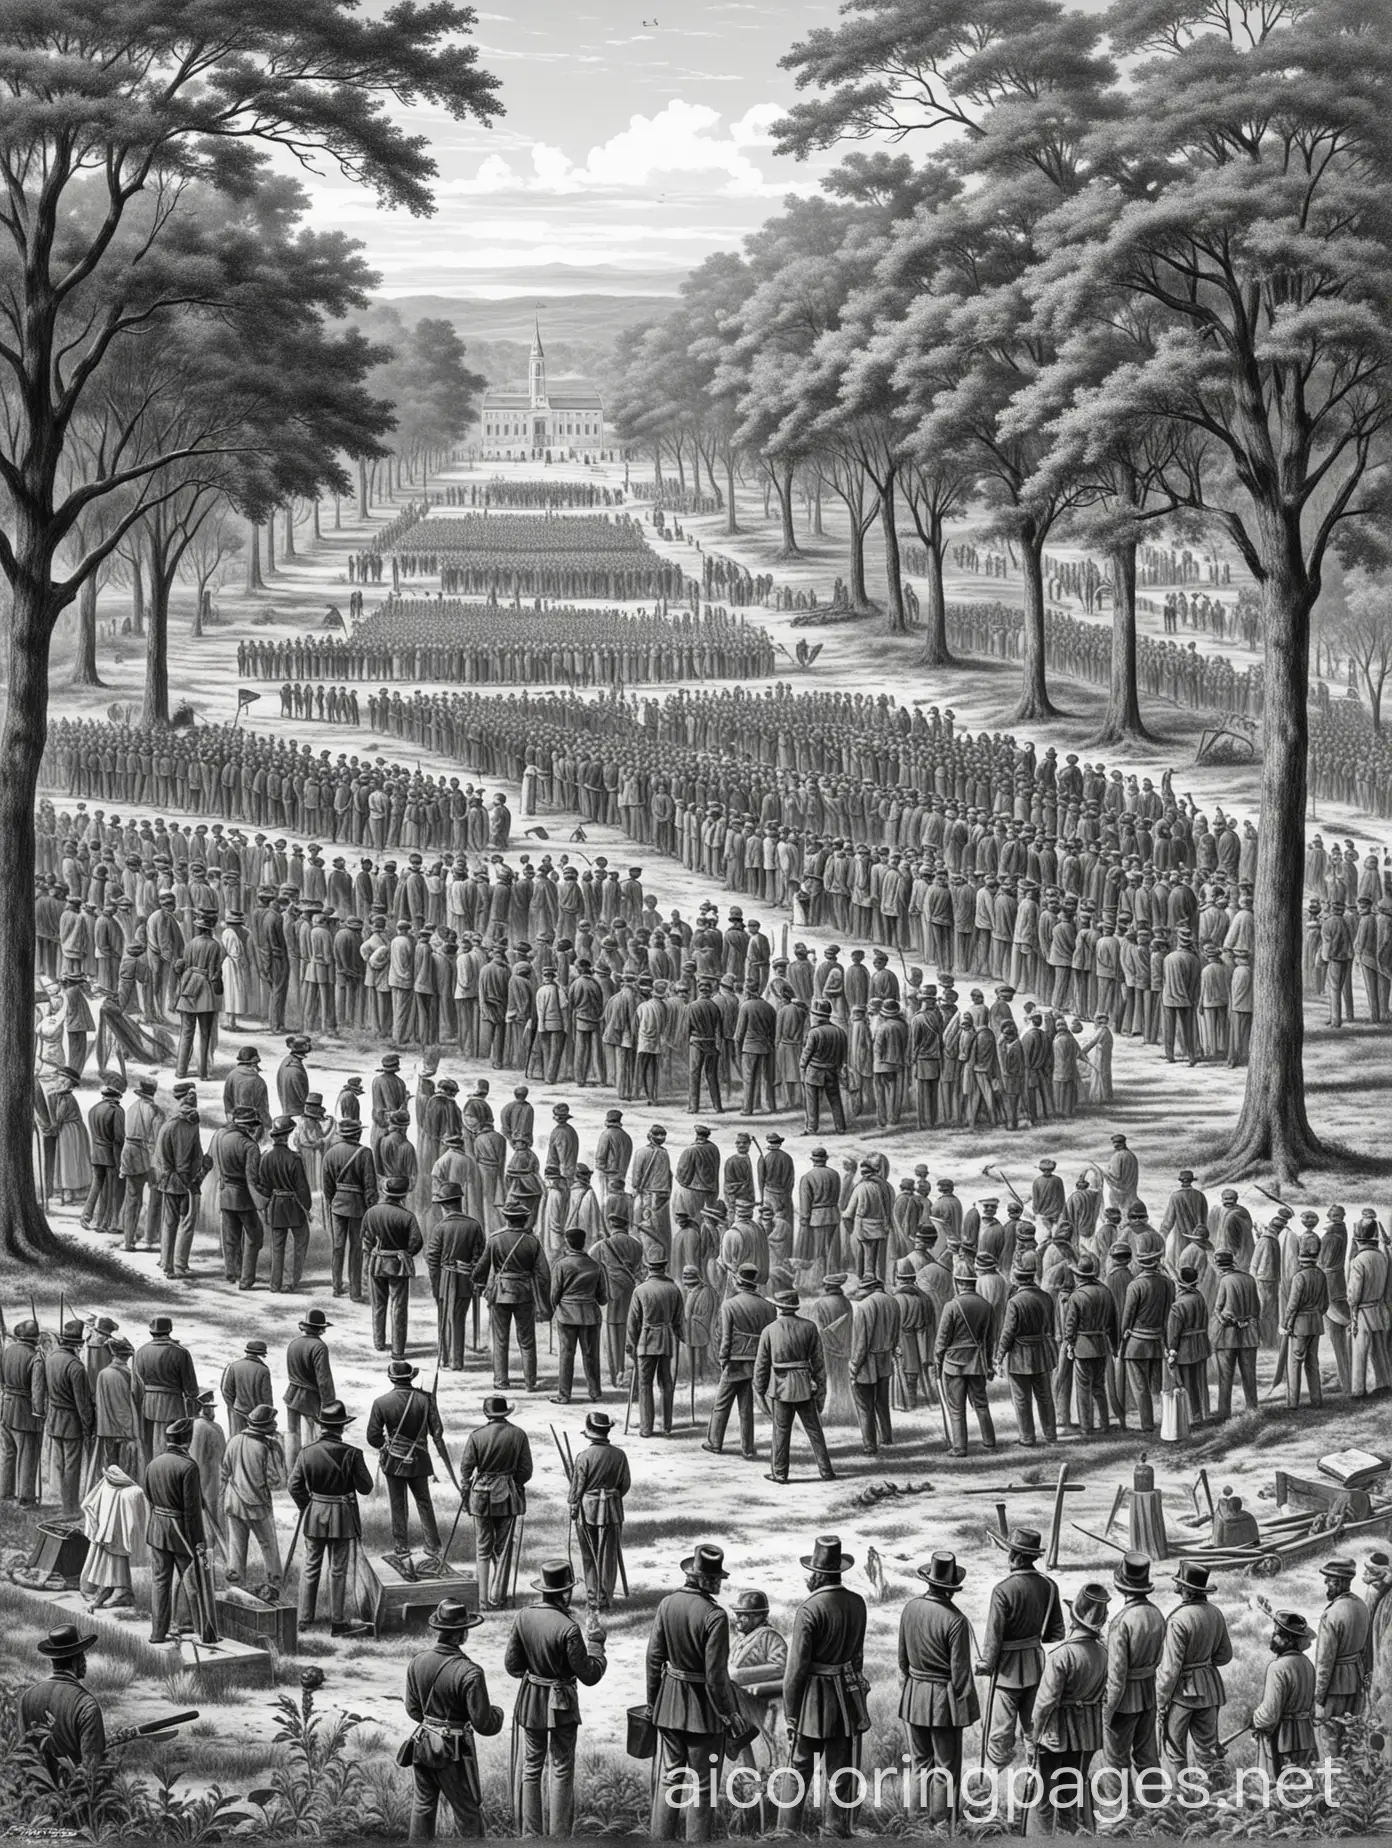 A scene depicting the May 1, 1865 gathering in Charleston, South Carolina, where recently freed enslaved people and Union Army members gathered to bury and decorate the graves of fallen Union soldiers at a former Confederate prison camp., Coloring Page, black and white, line art, white background, Simplicity, Ample White Space.